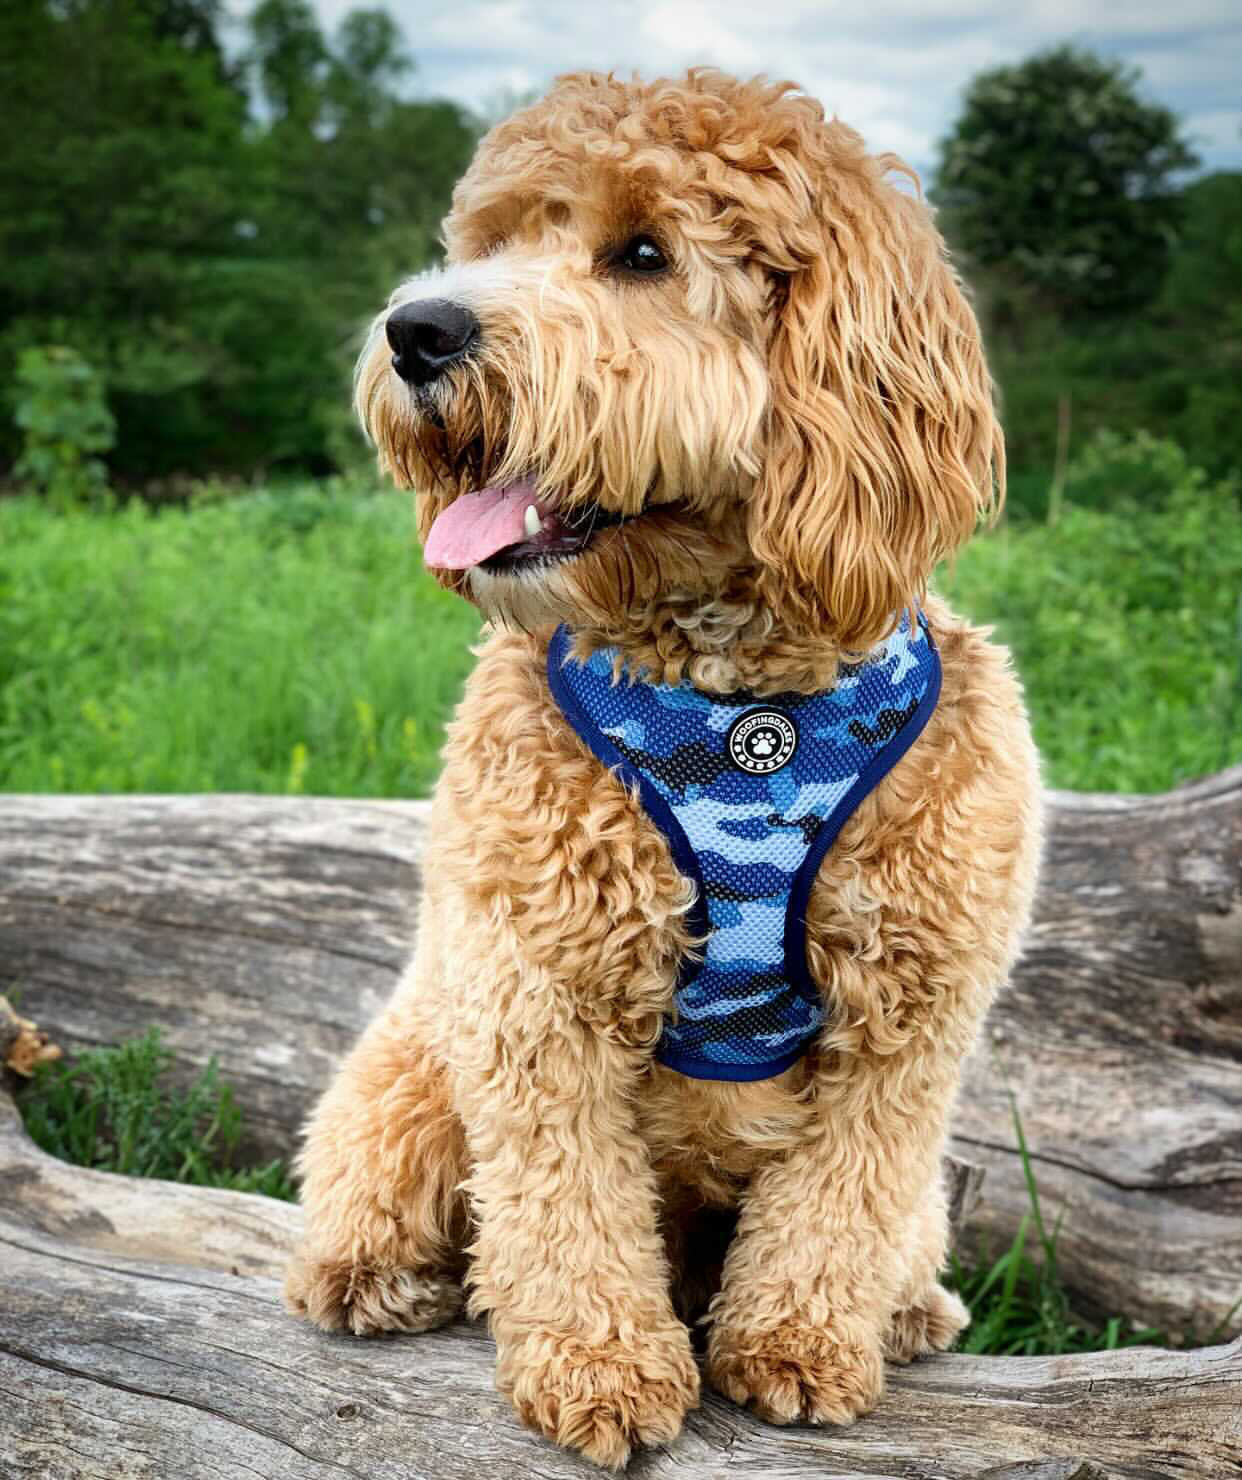 Can't See Me Blue Reversible Harness